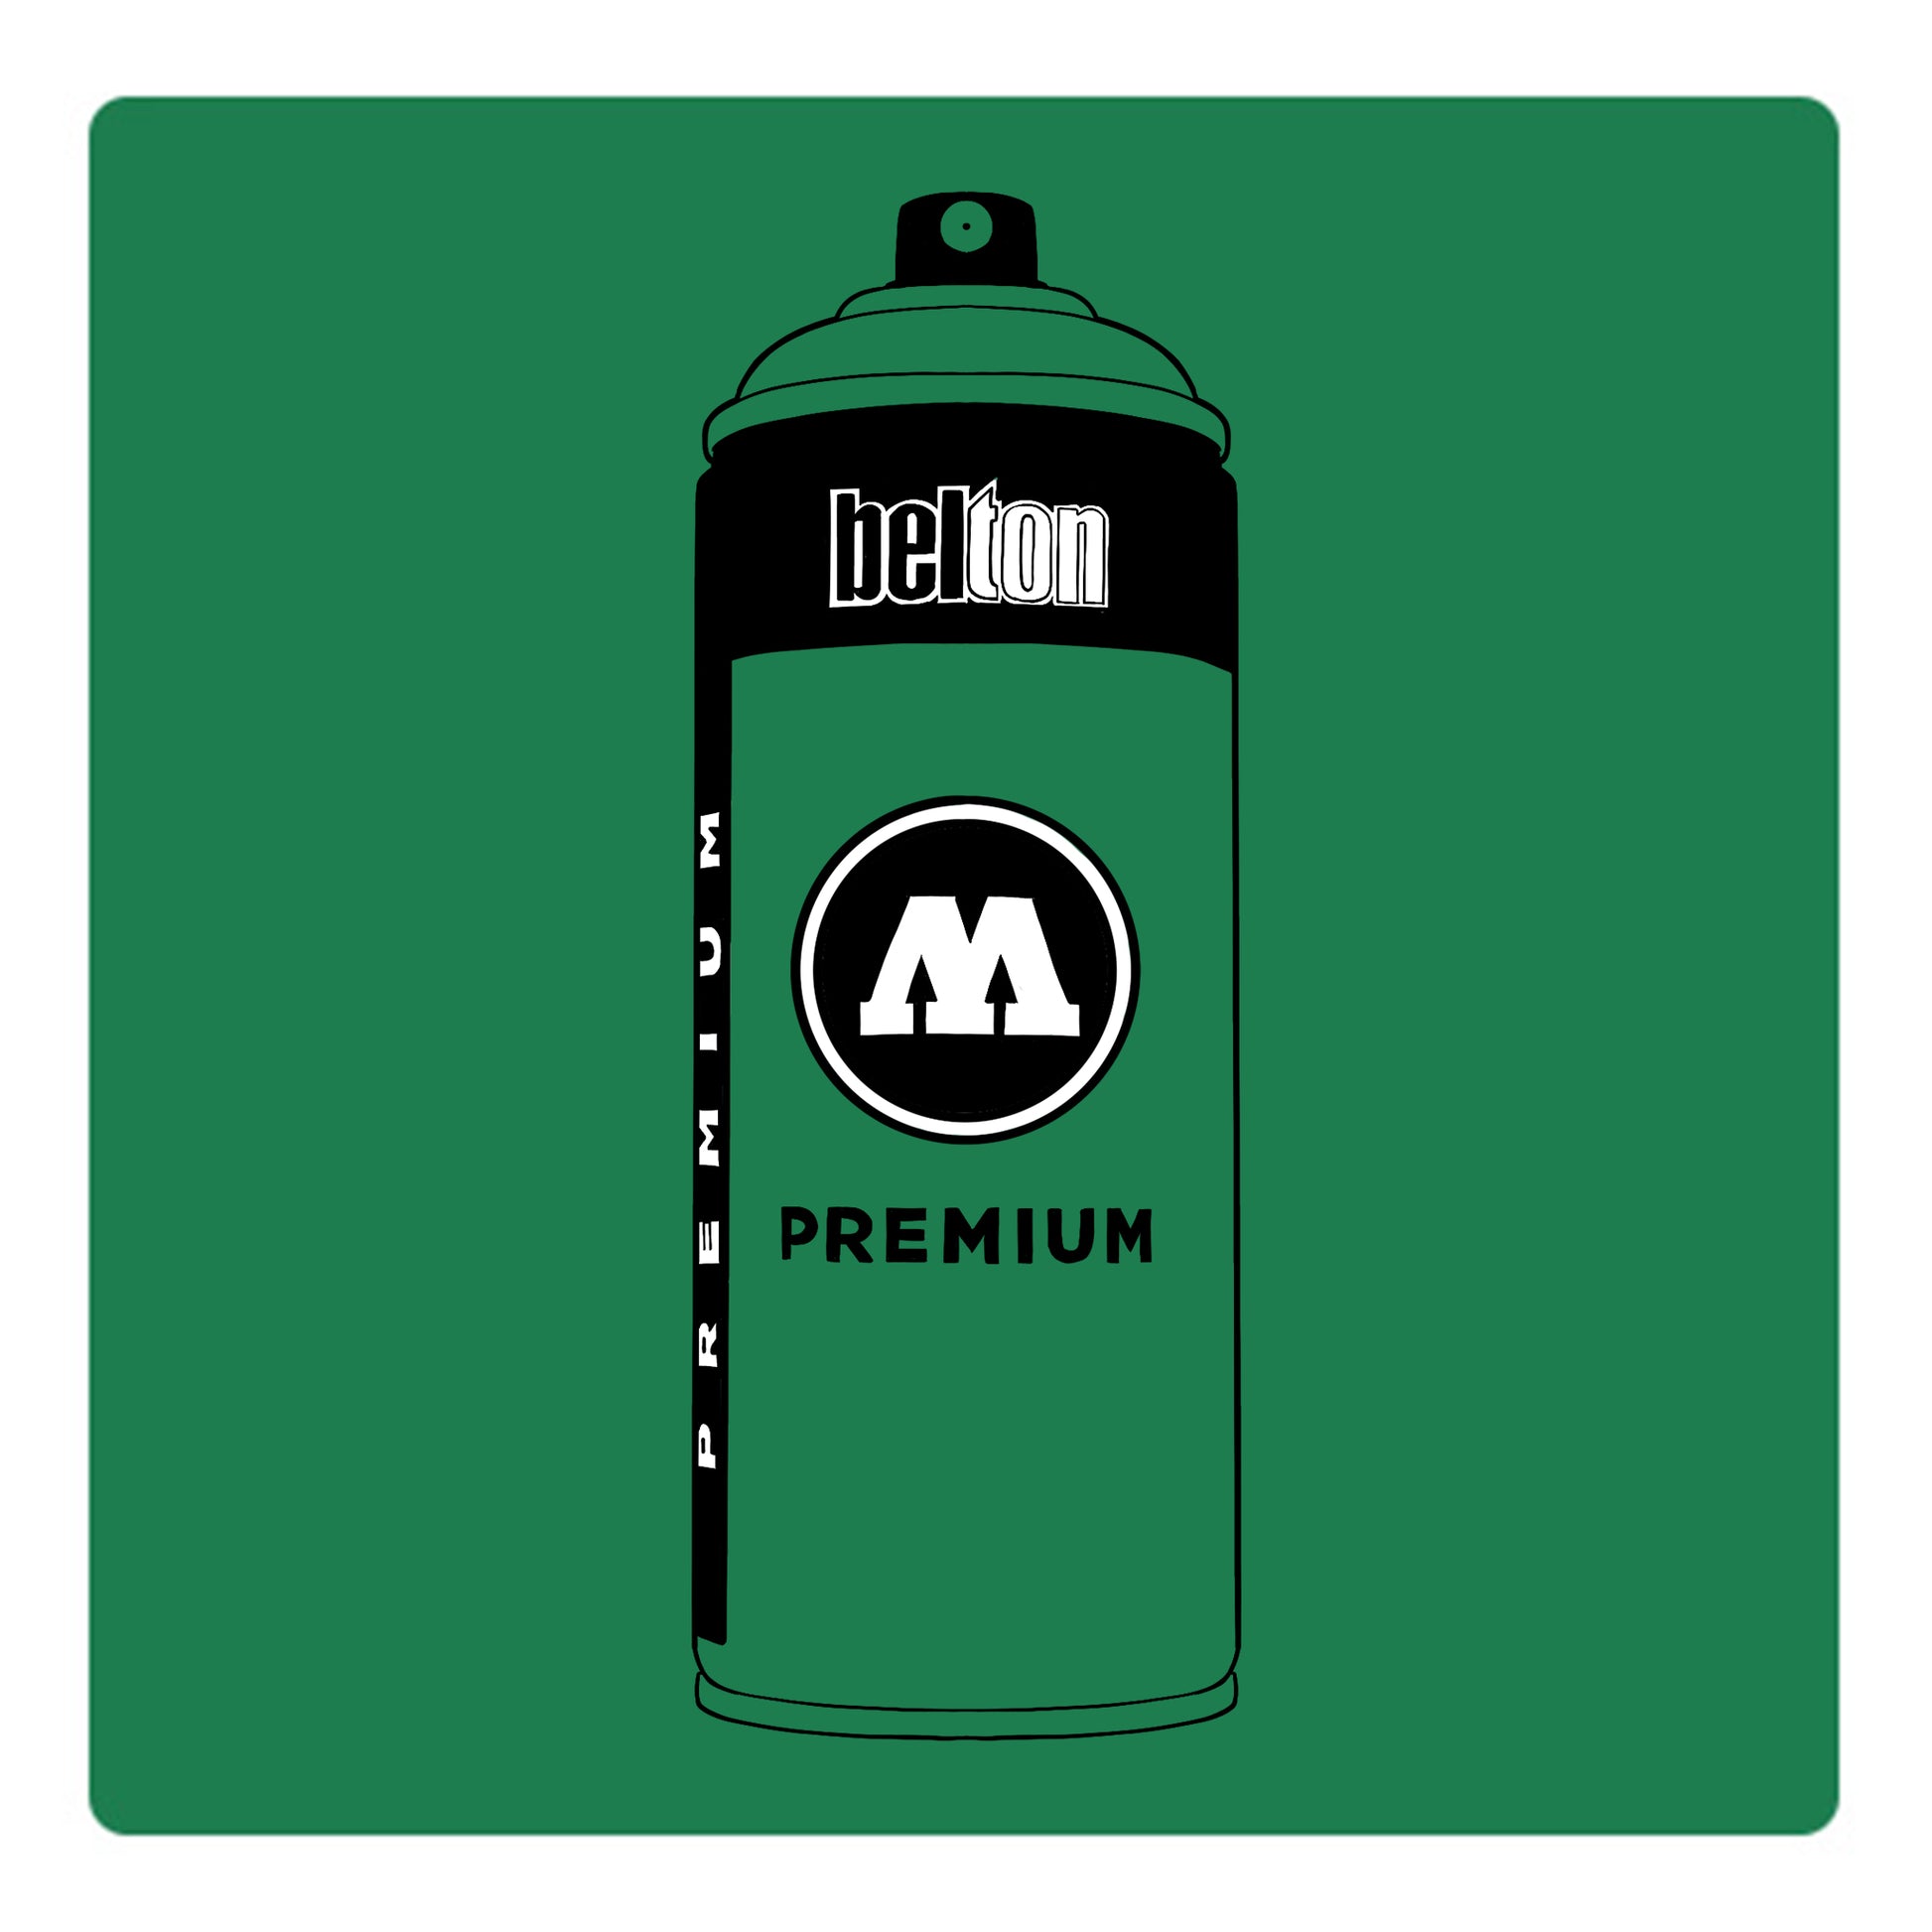 A black outline drawing of a dark emerald spray paint can with the words "belton","premium" and the letter"M" written on the face in black and white font. The background is a color swatch of the same dark emerald with a white border